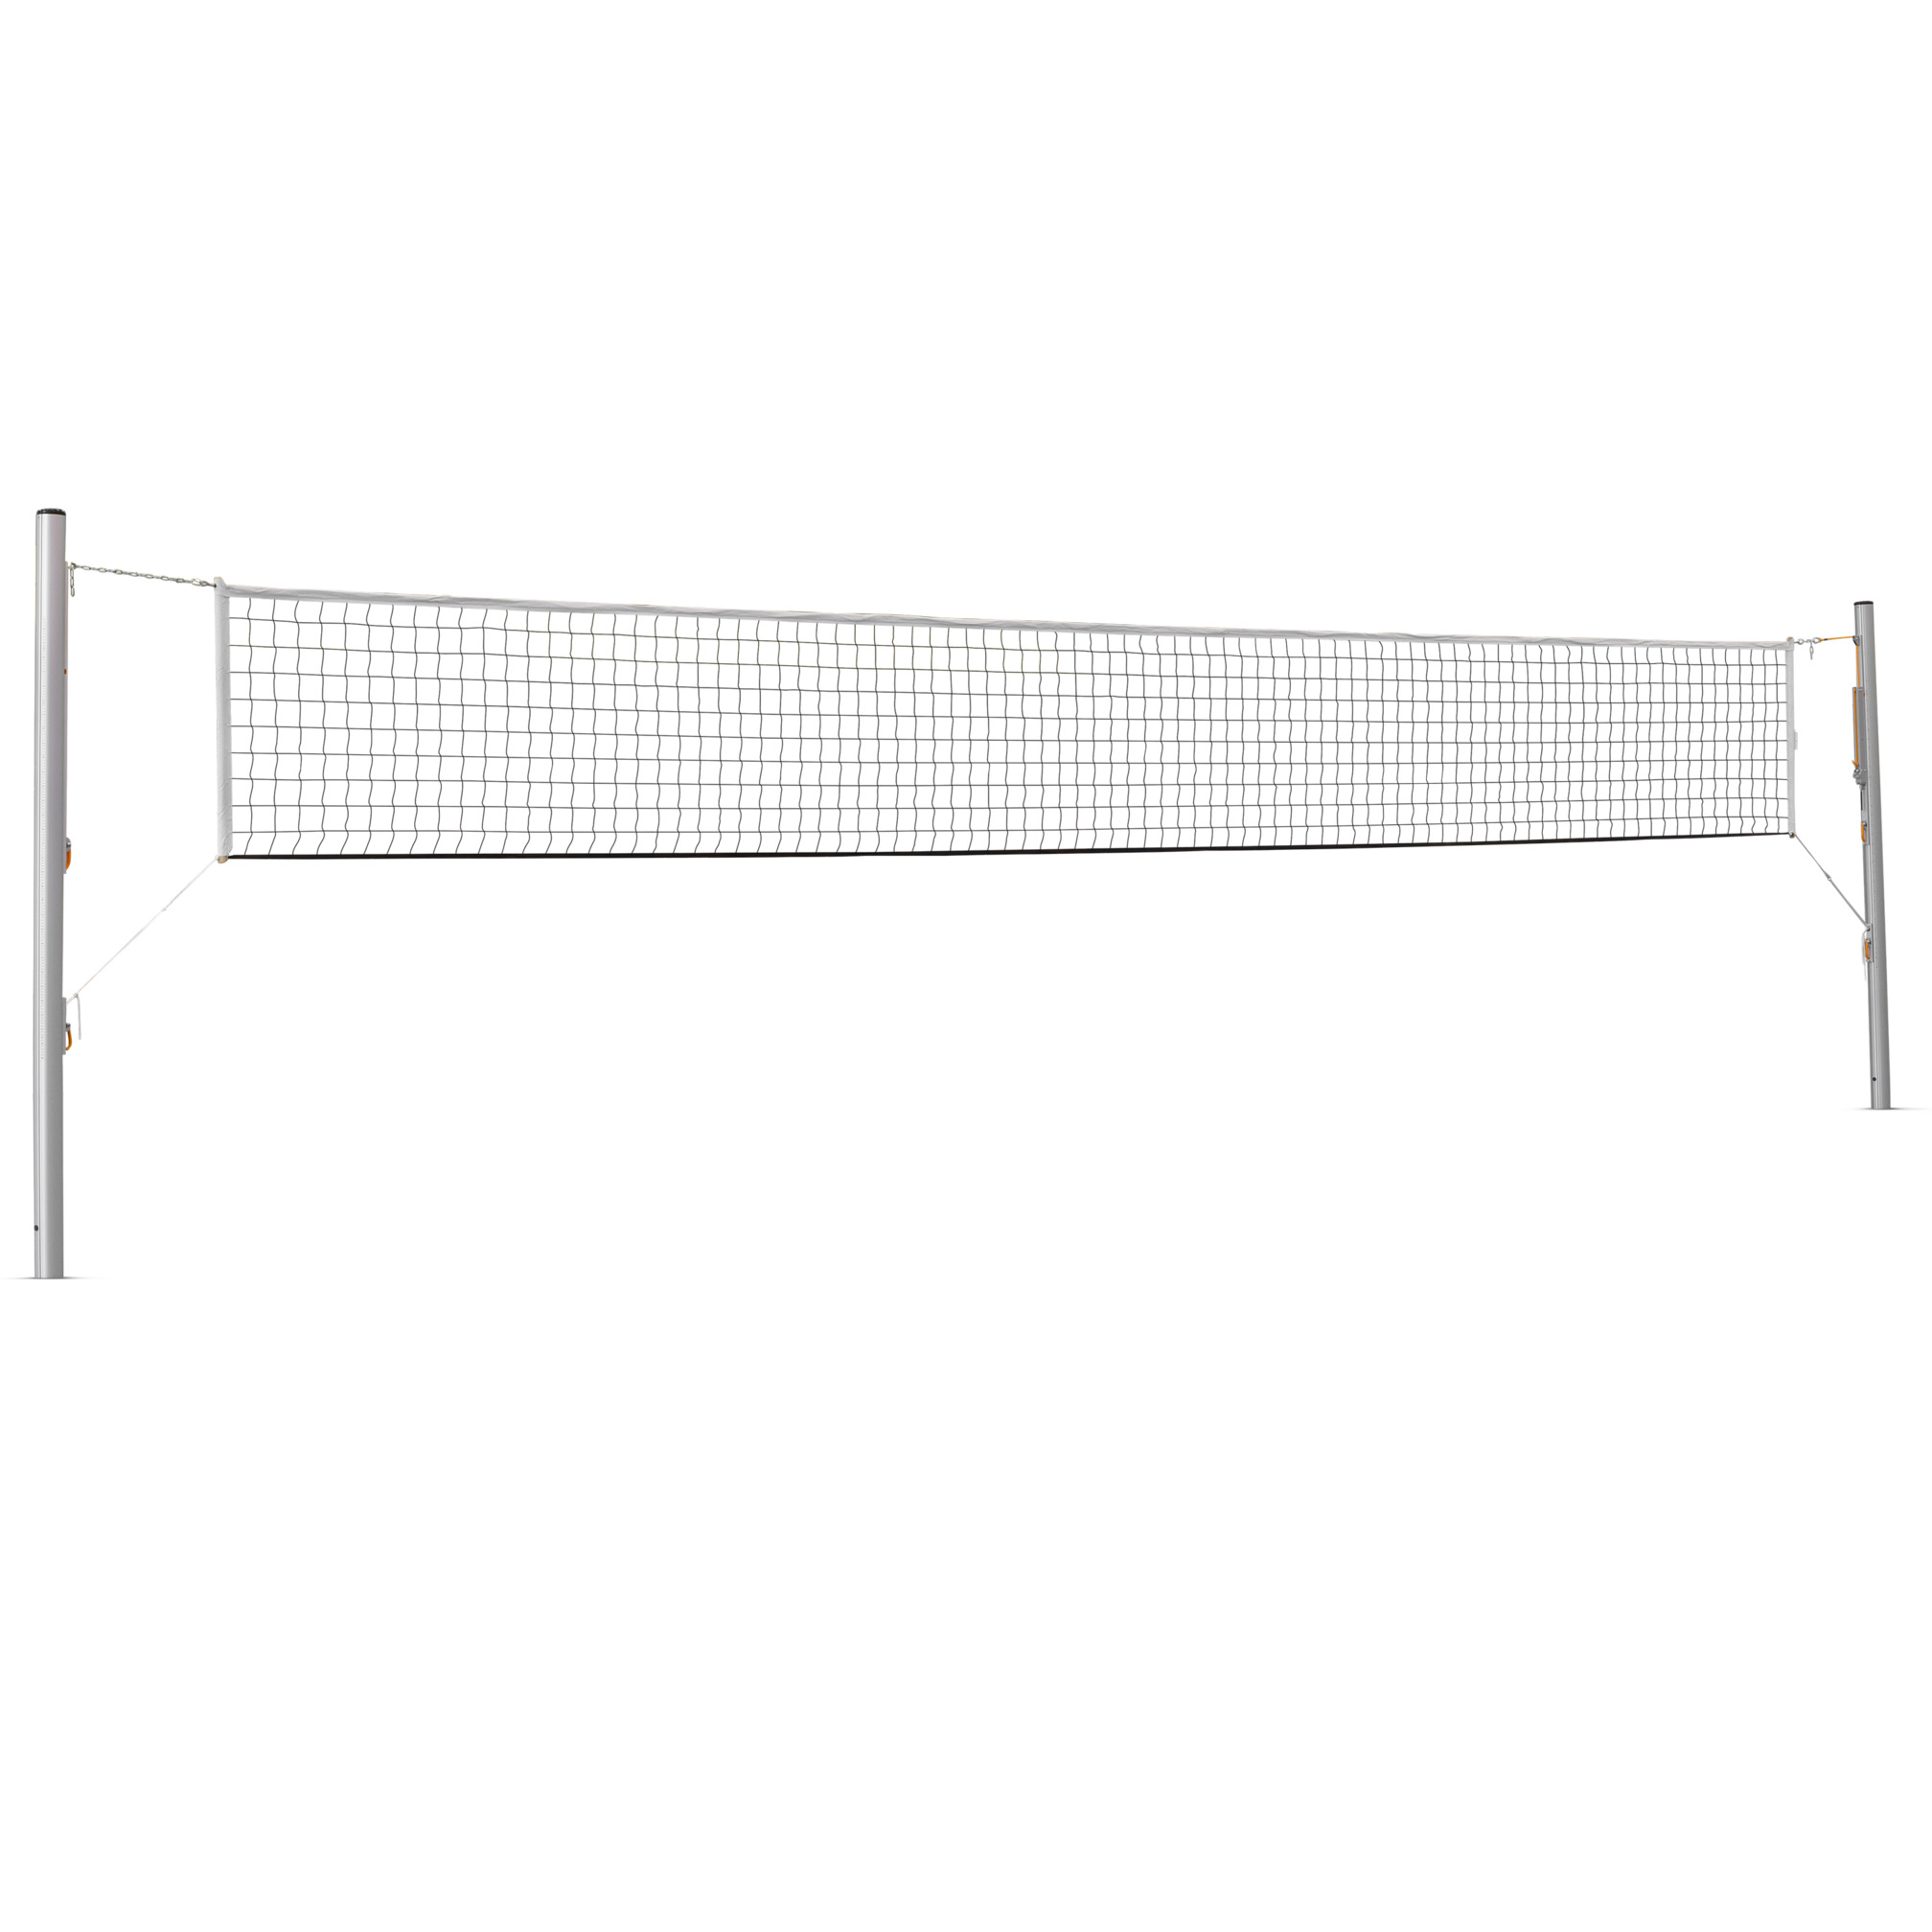 School and recreational volleyball net